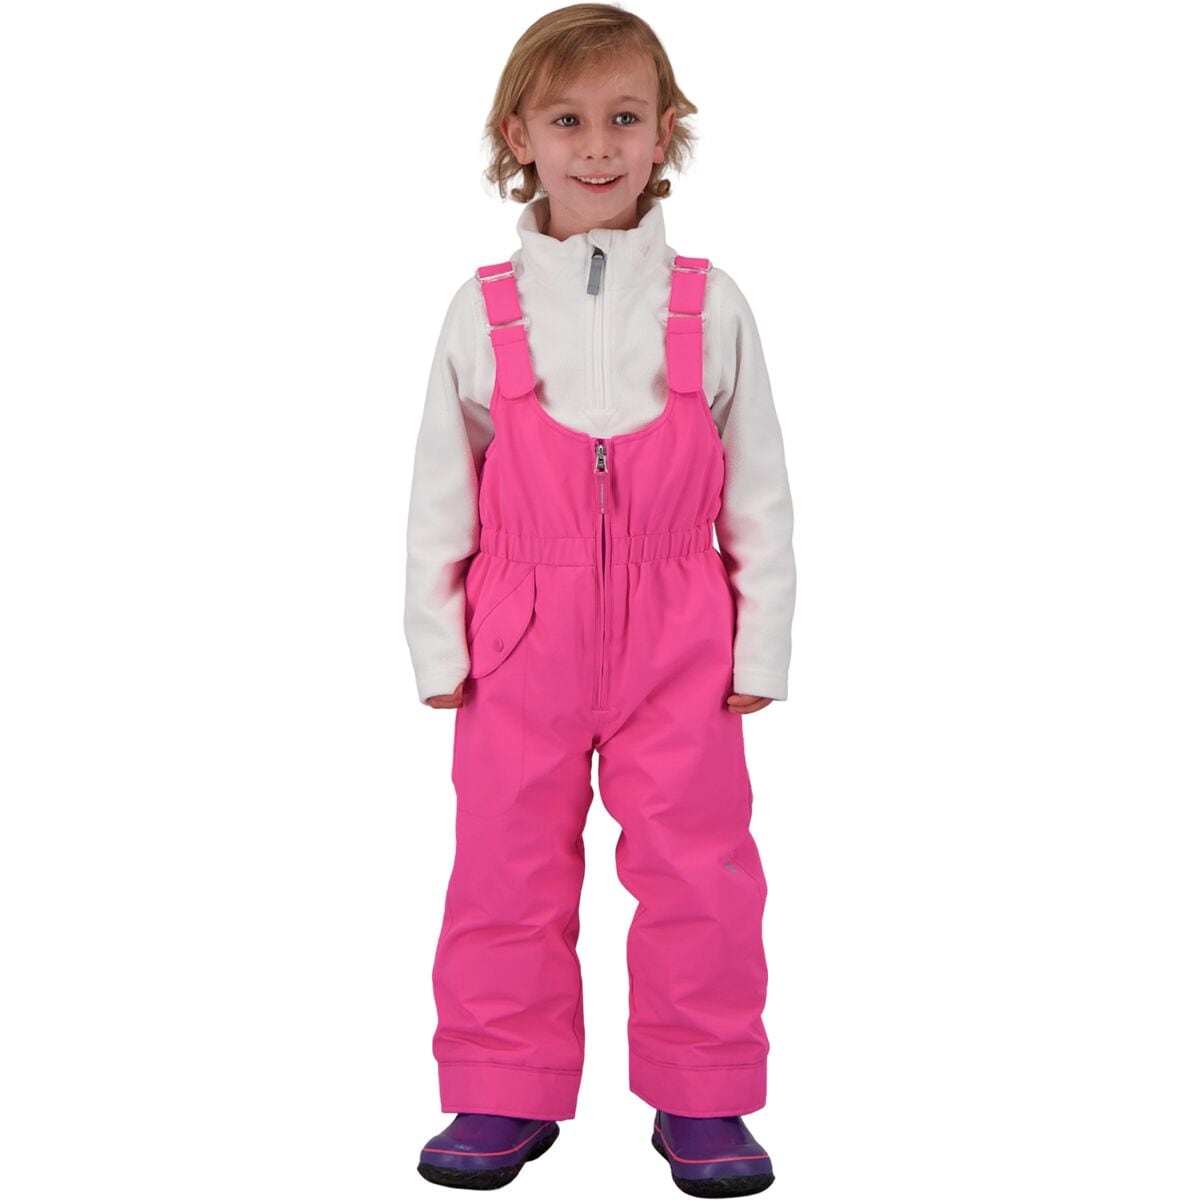 Obermeyer Snoverall Pant - Toddler Girls' Pink Pwr